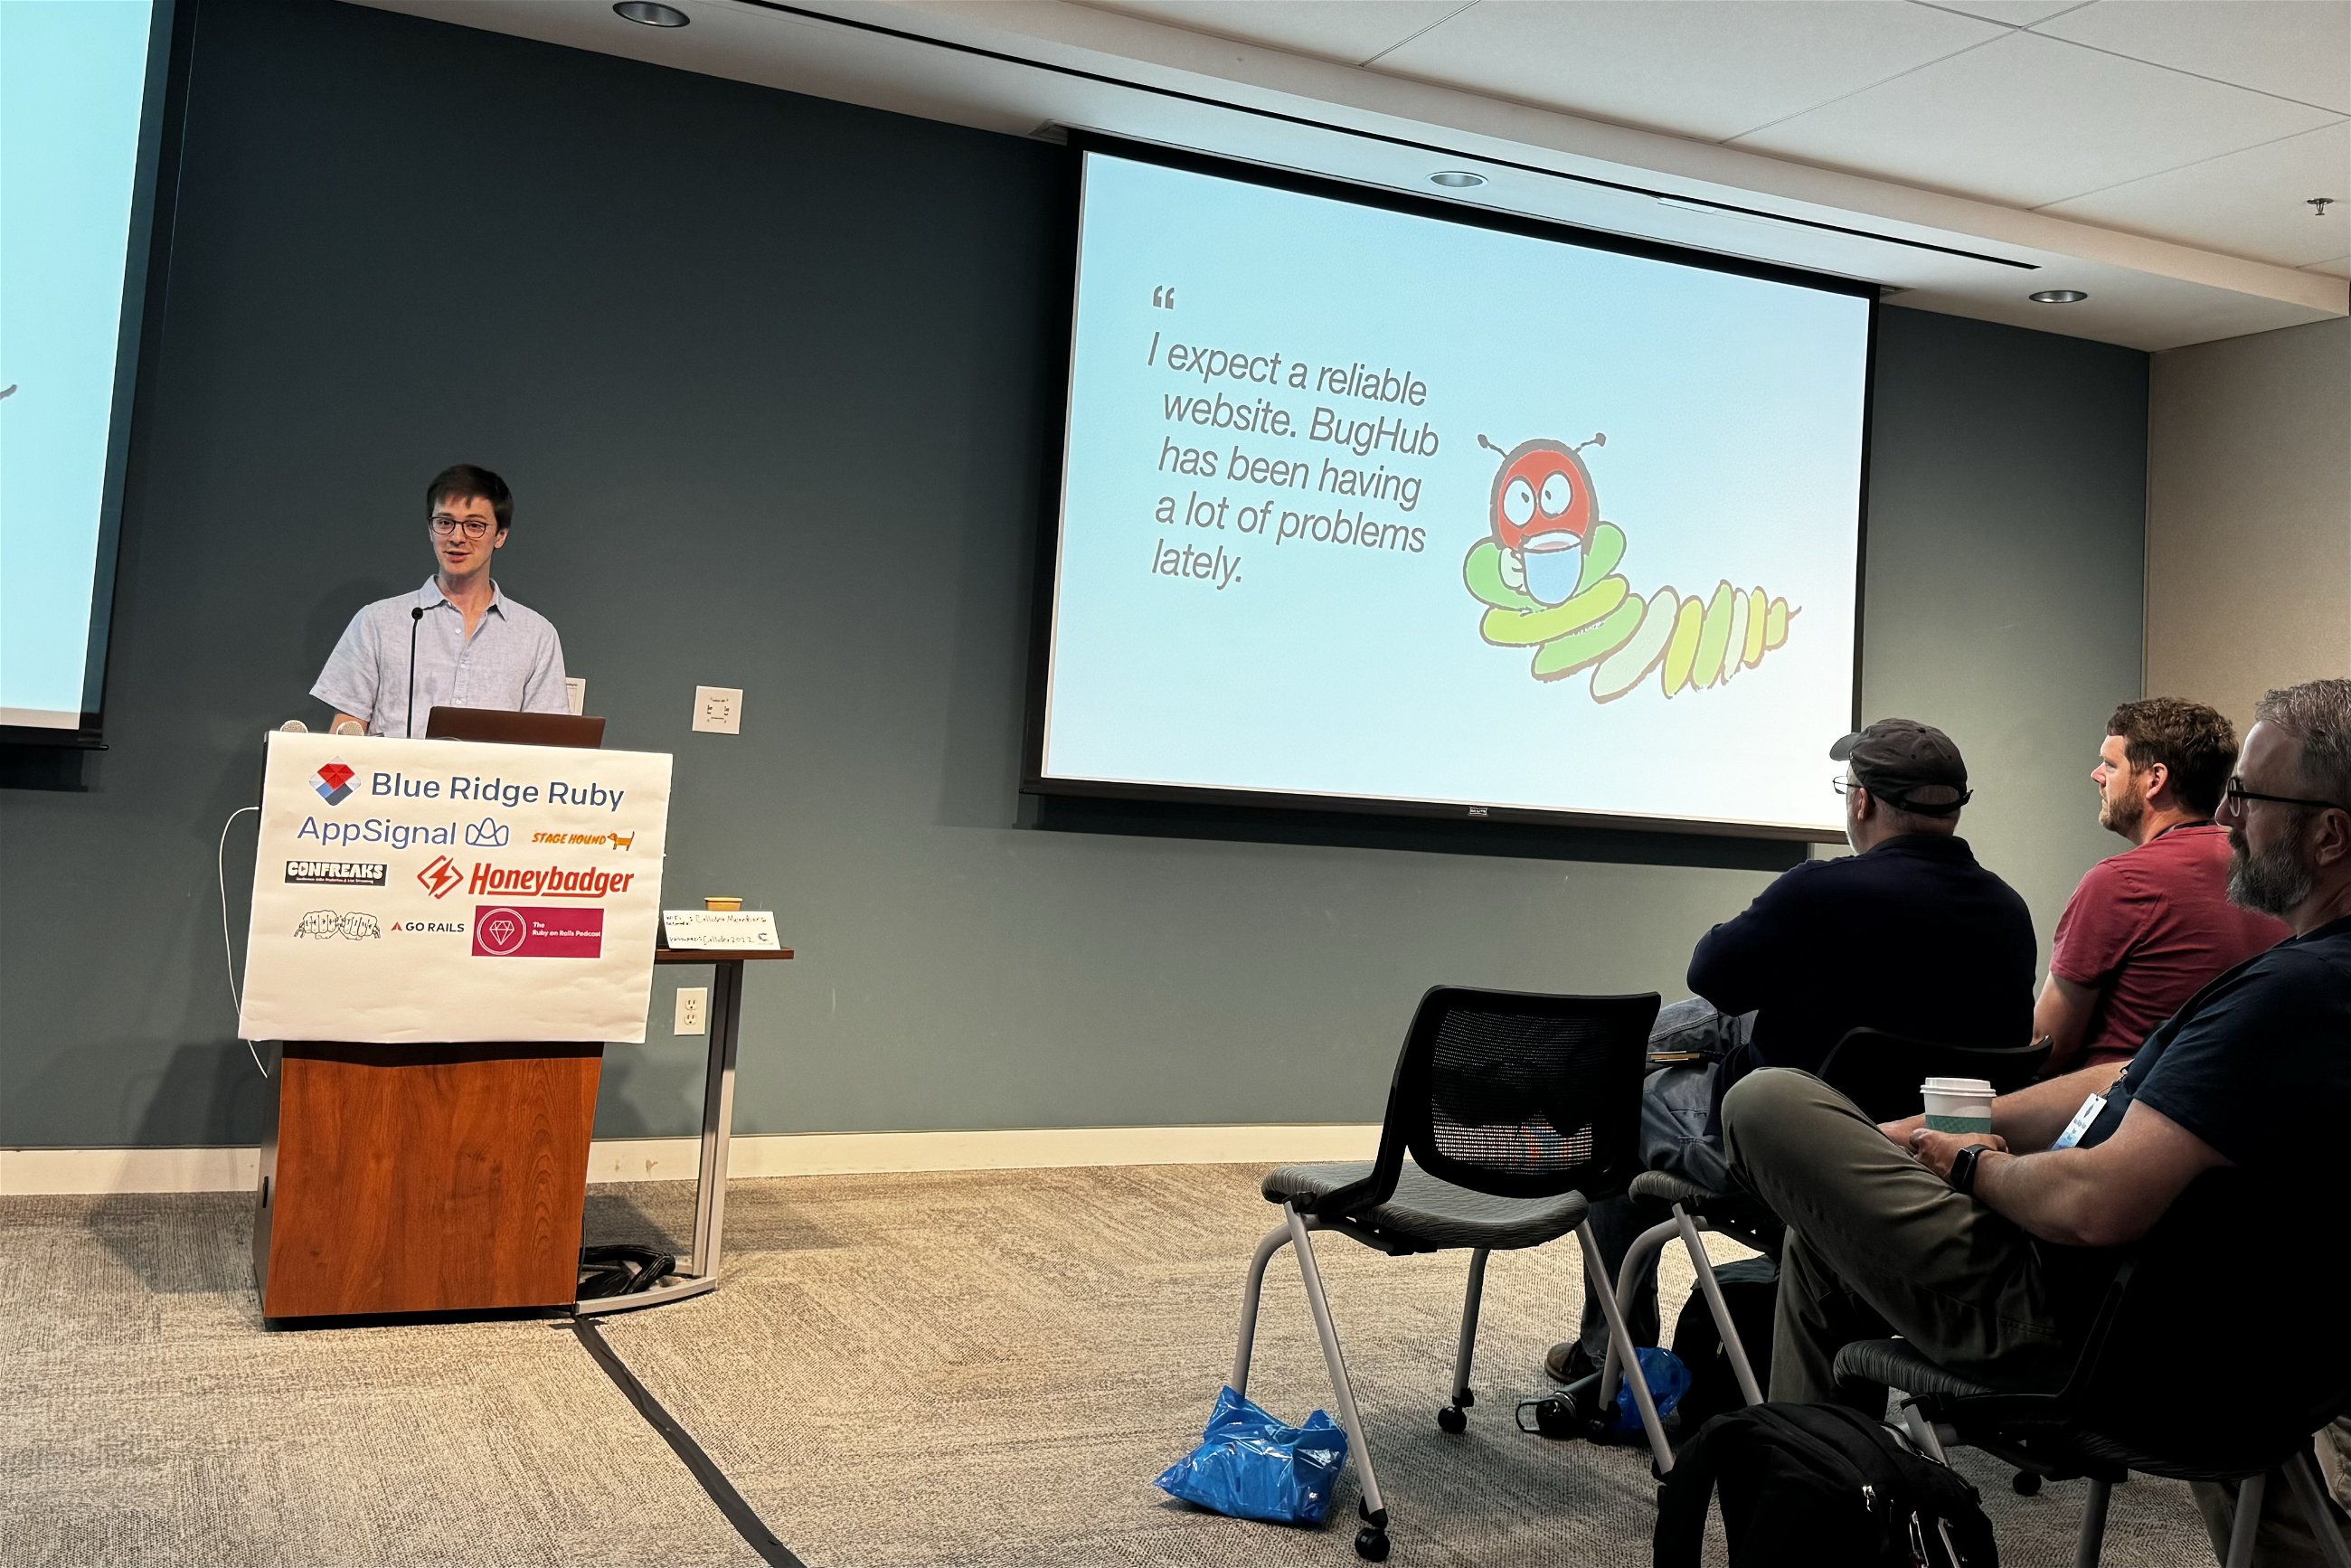 Daniel Colson at a Blue Ridge Ruby conference presenting a slide titled "I expect a reliable website. BugHub has been having a lot of problems lately." with a cartoon bug image, in front of an audience of attentive attendees.